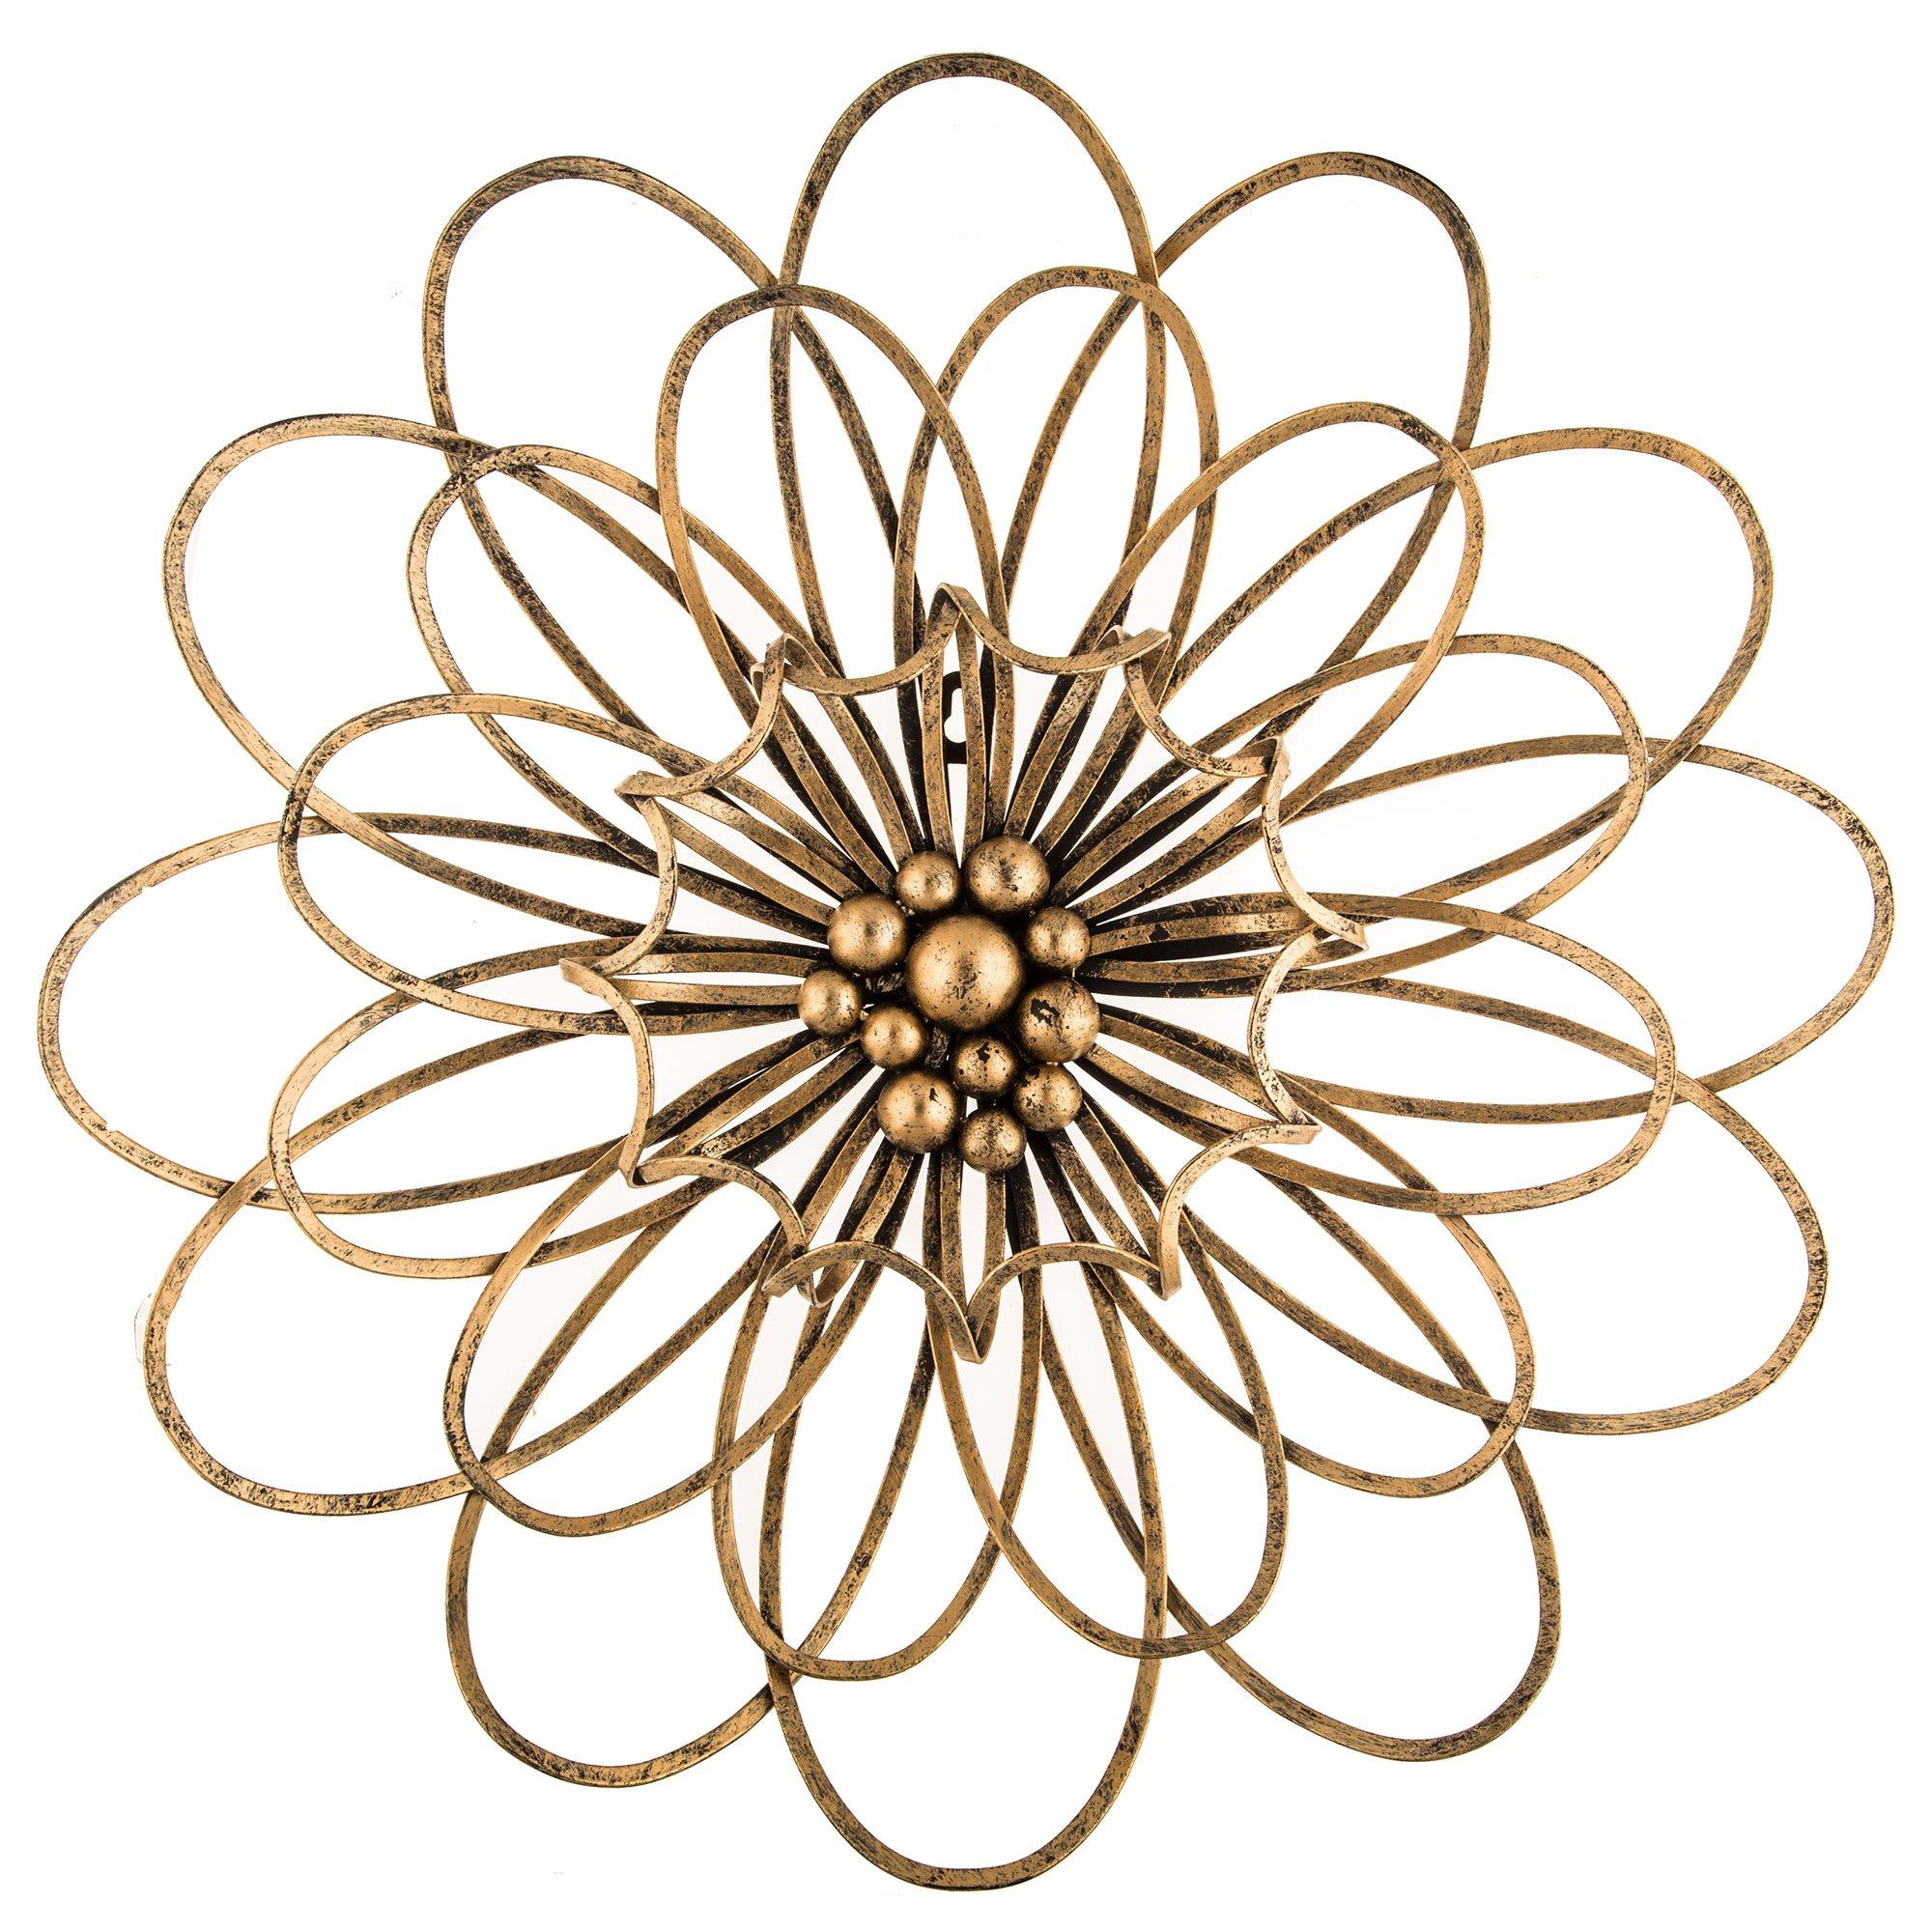 Gold Holly Fruit Metal Flower Decor Set Of 4 For Birthday Parties And  Events From Tingfagdao, $6.67